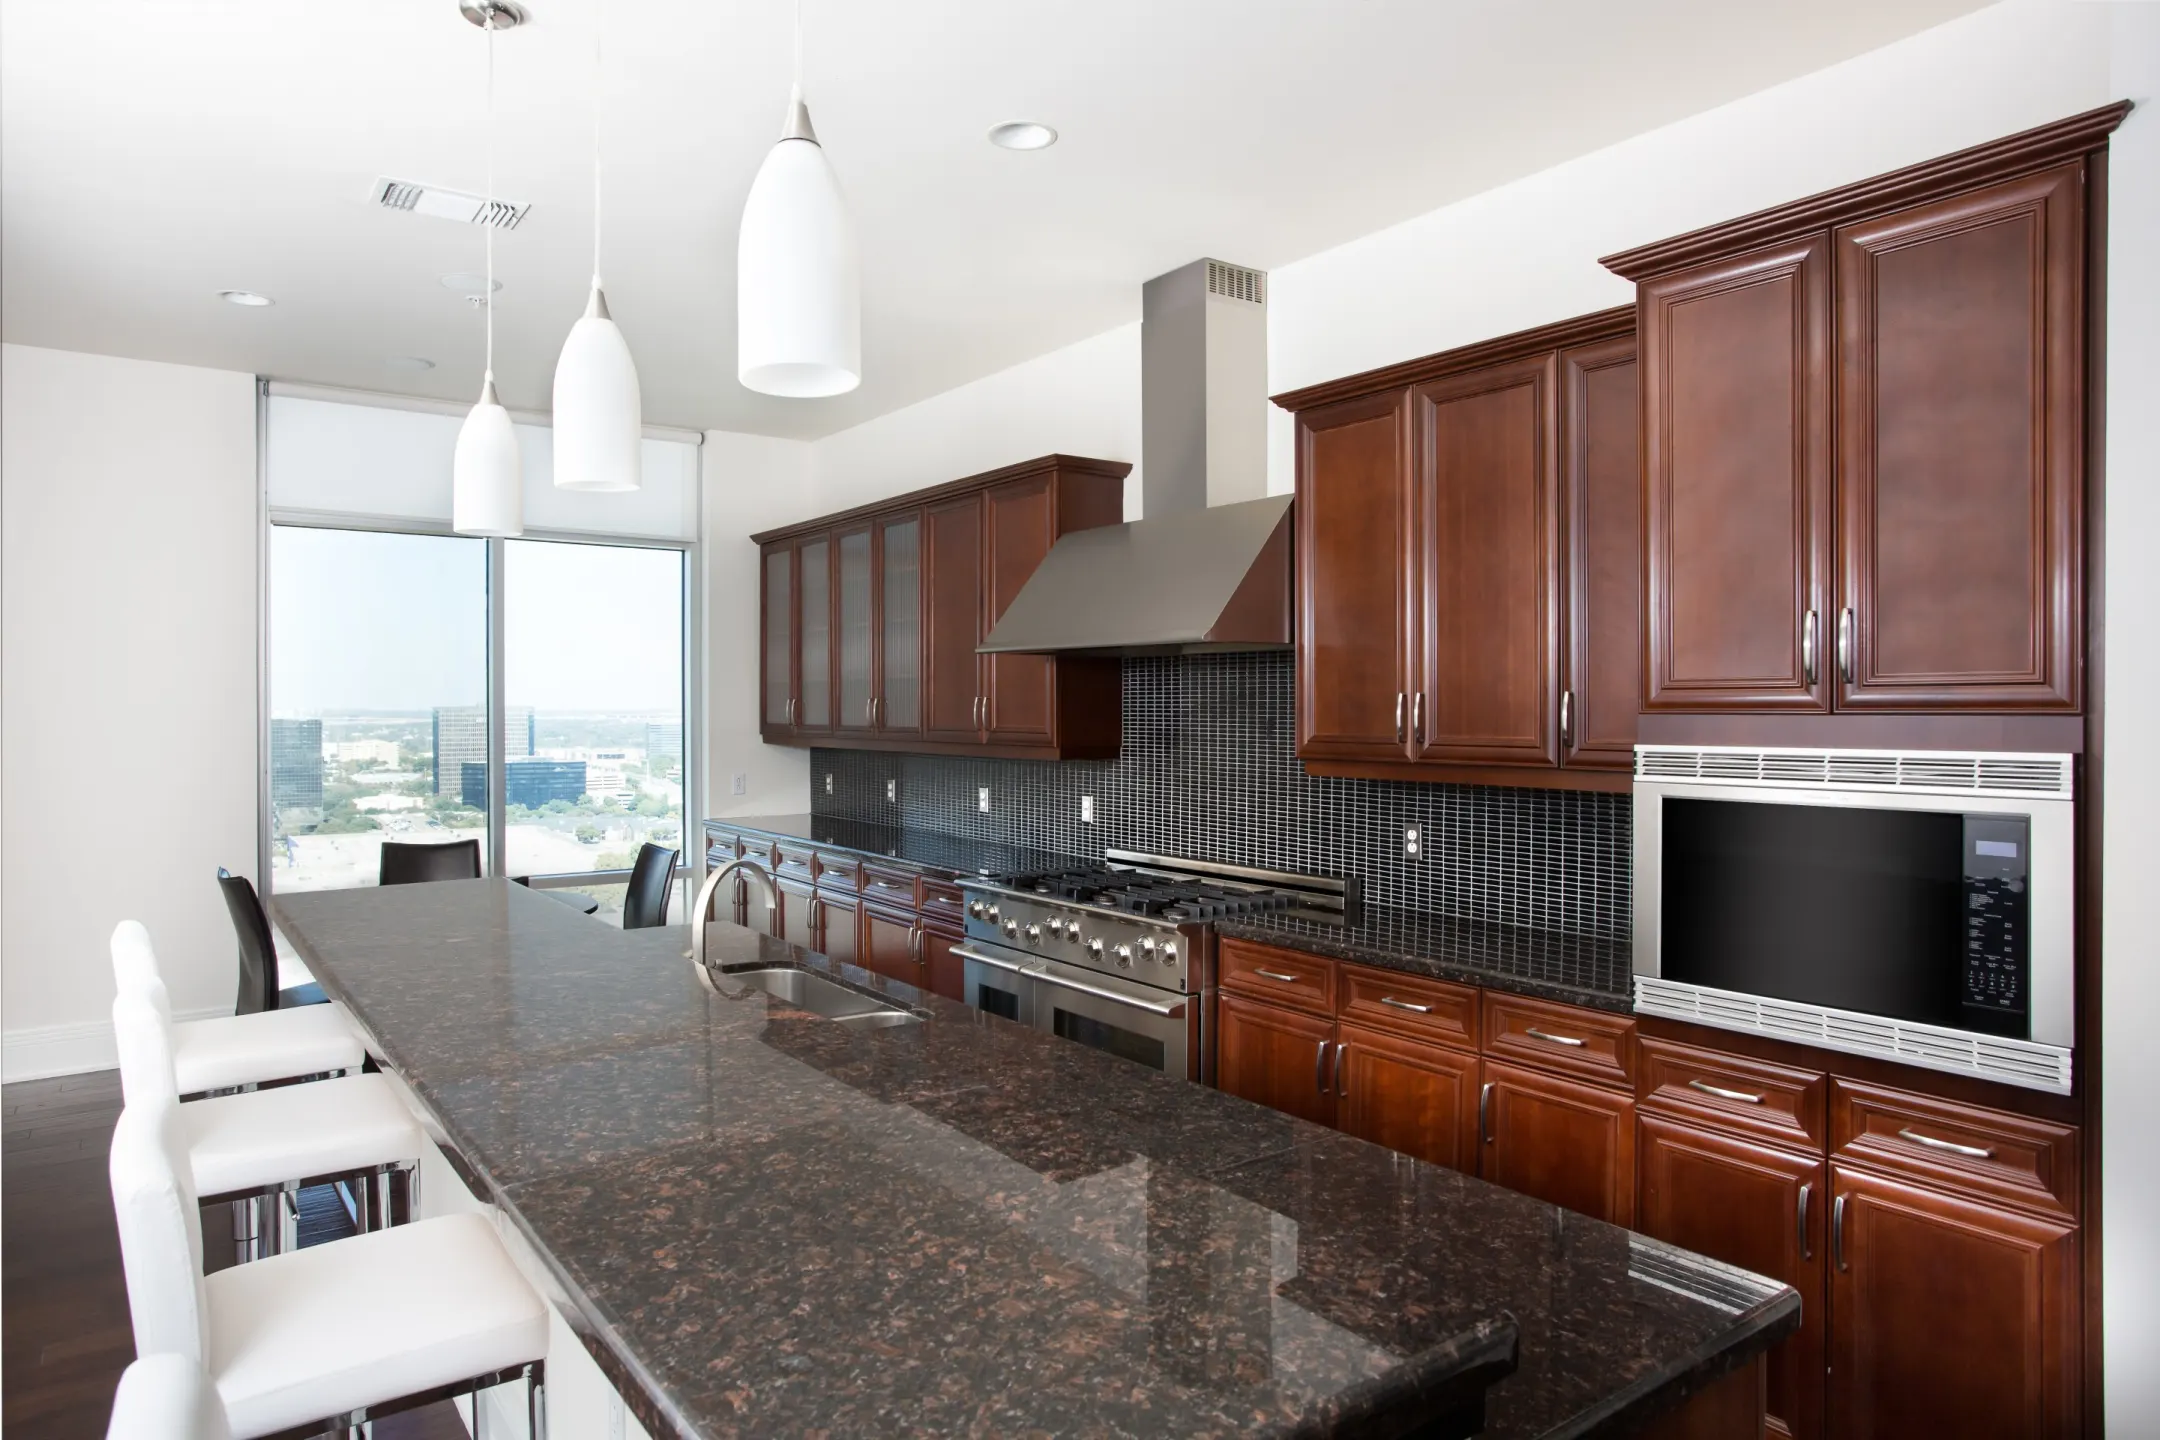 Kitchen - The Heights at Park Lane - Dallas, TX